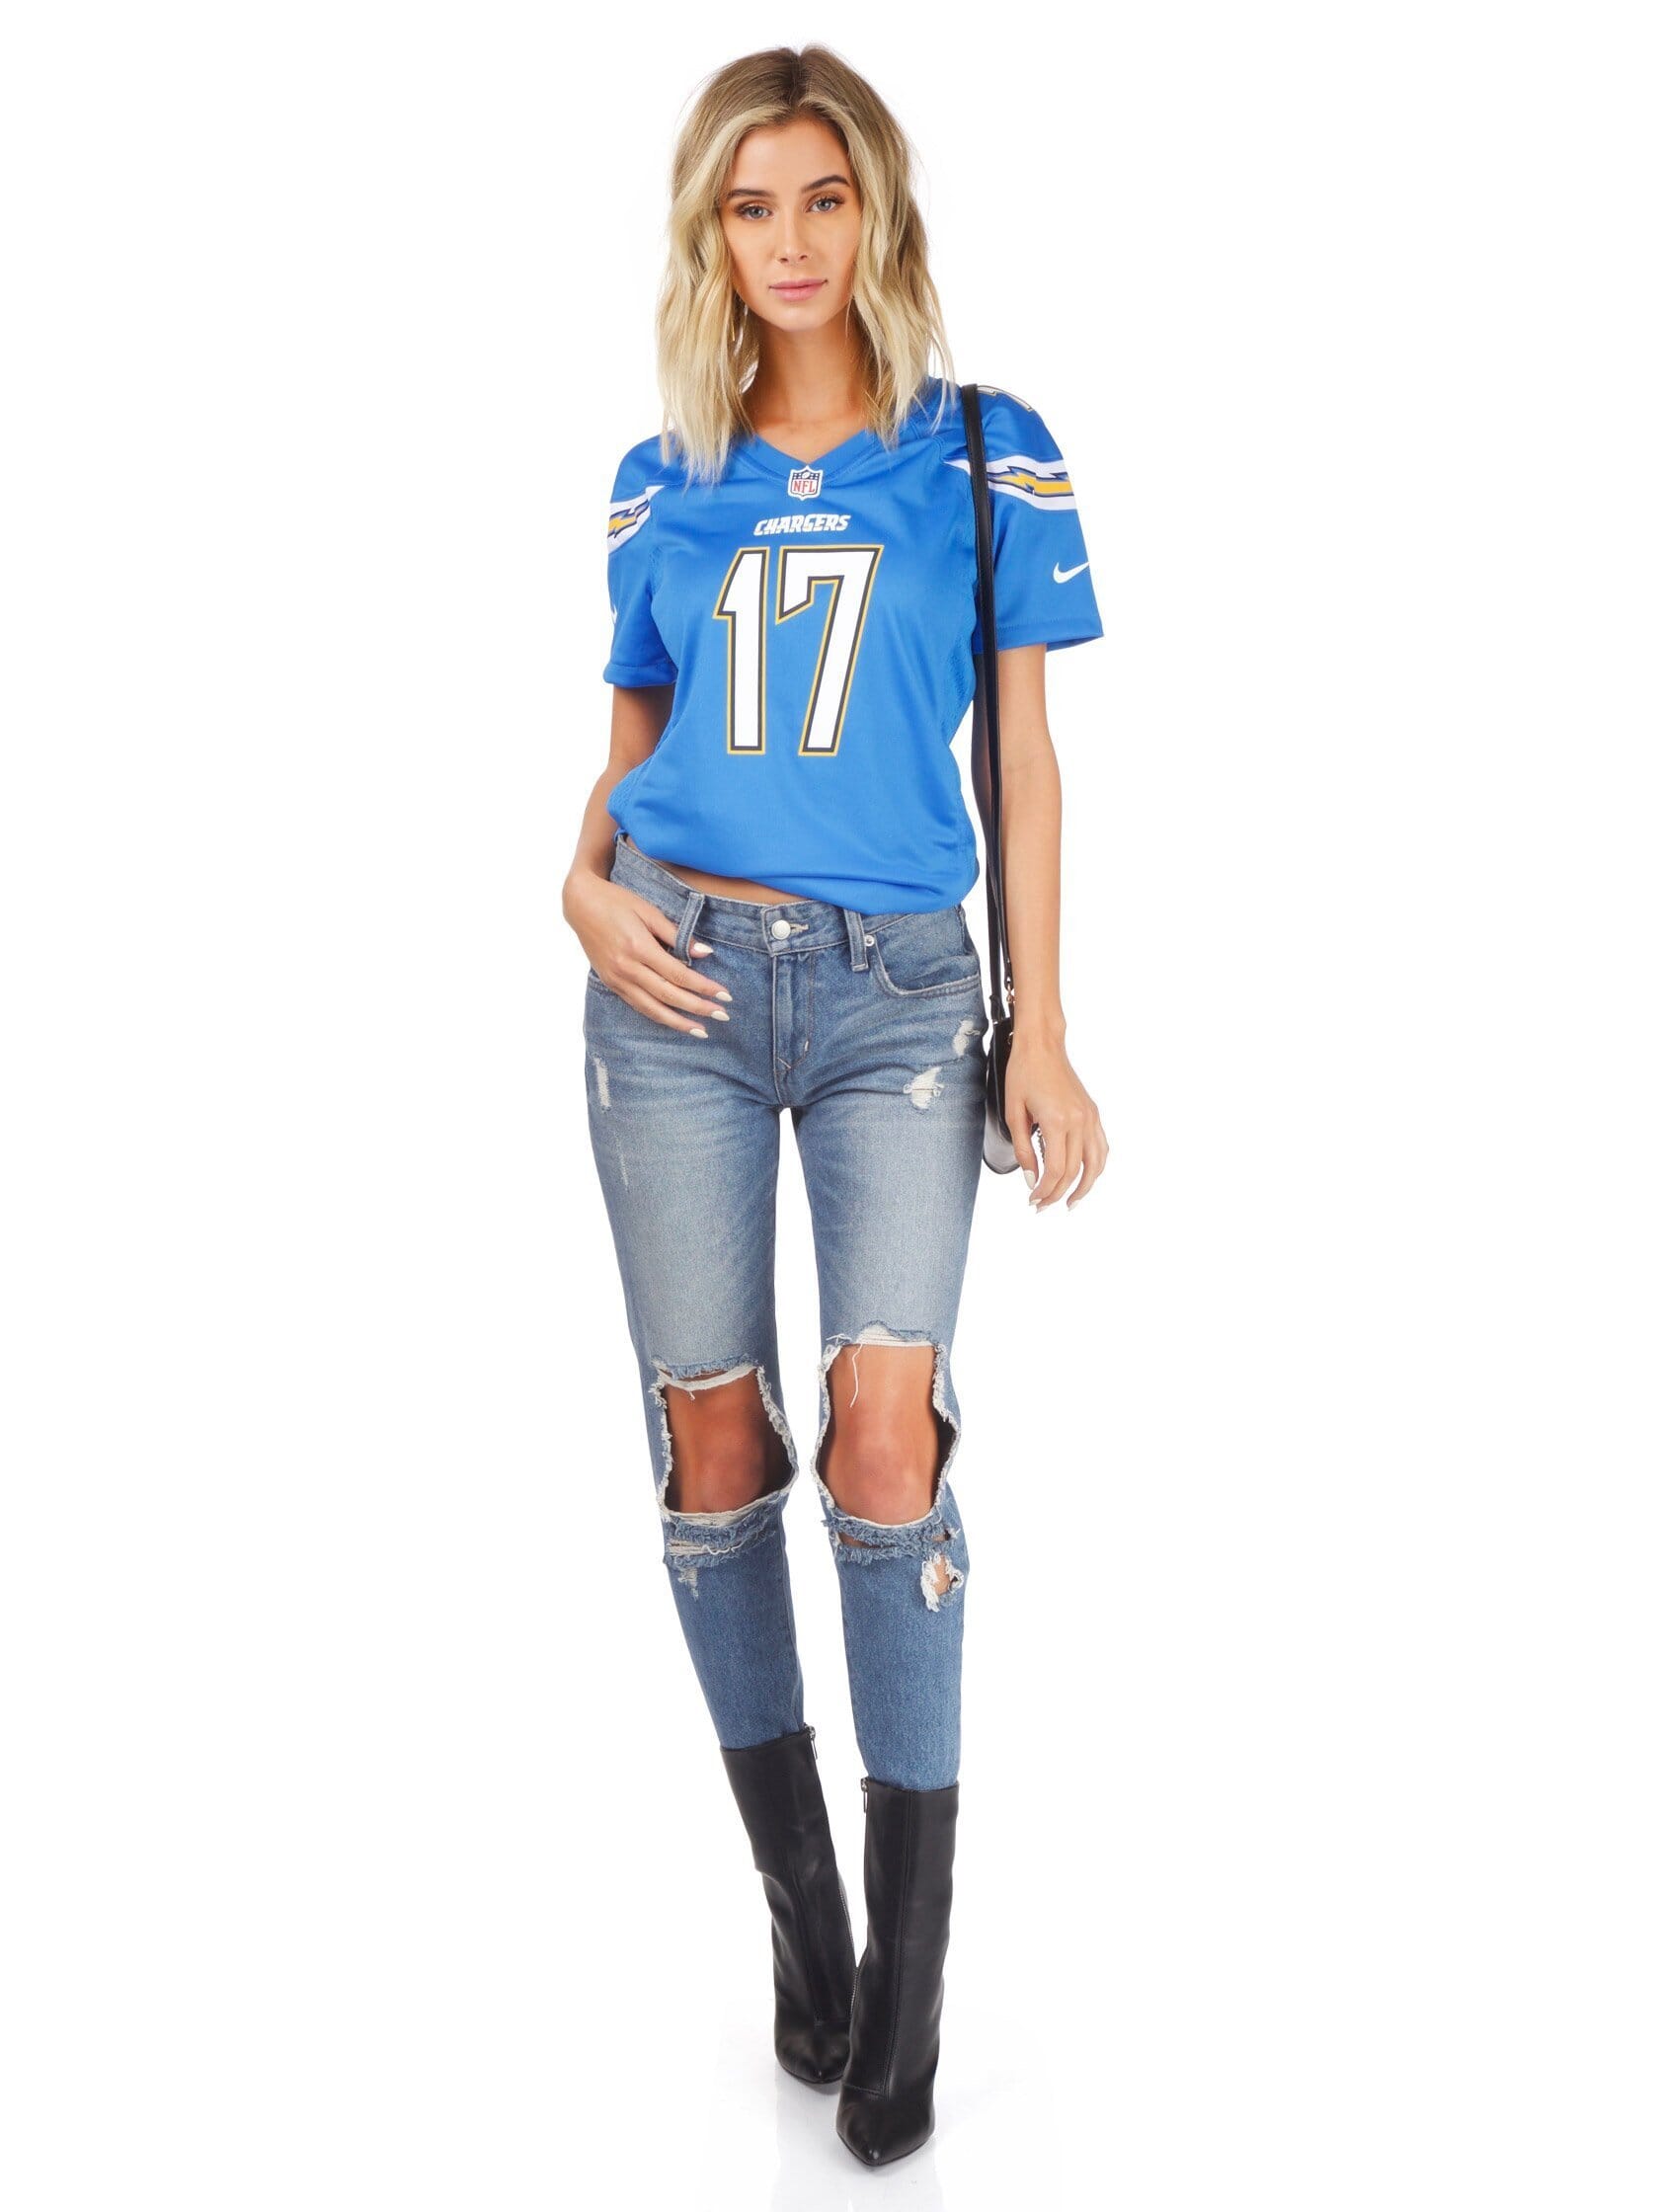 : Chargers Jersey